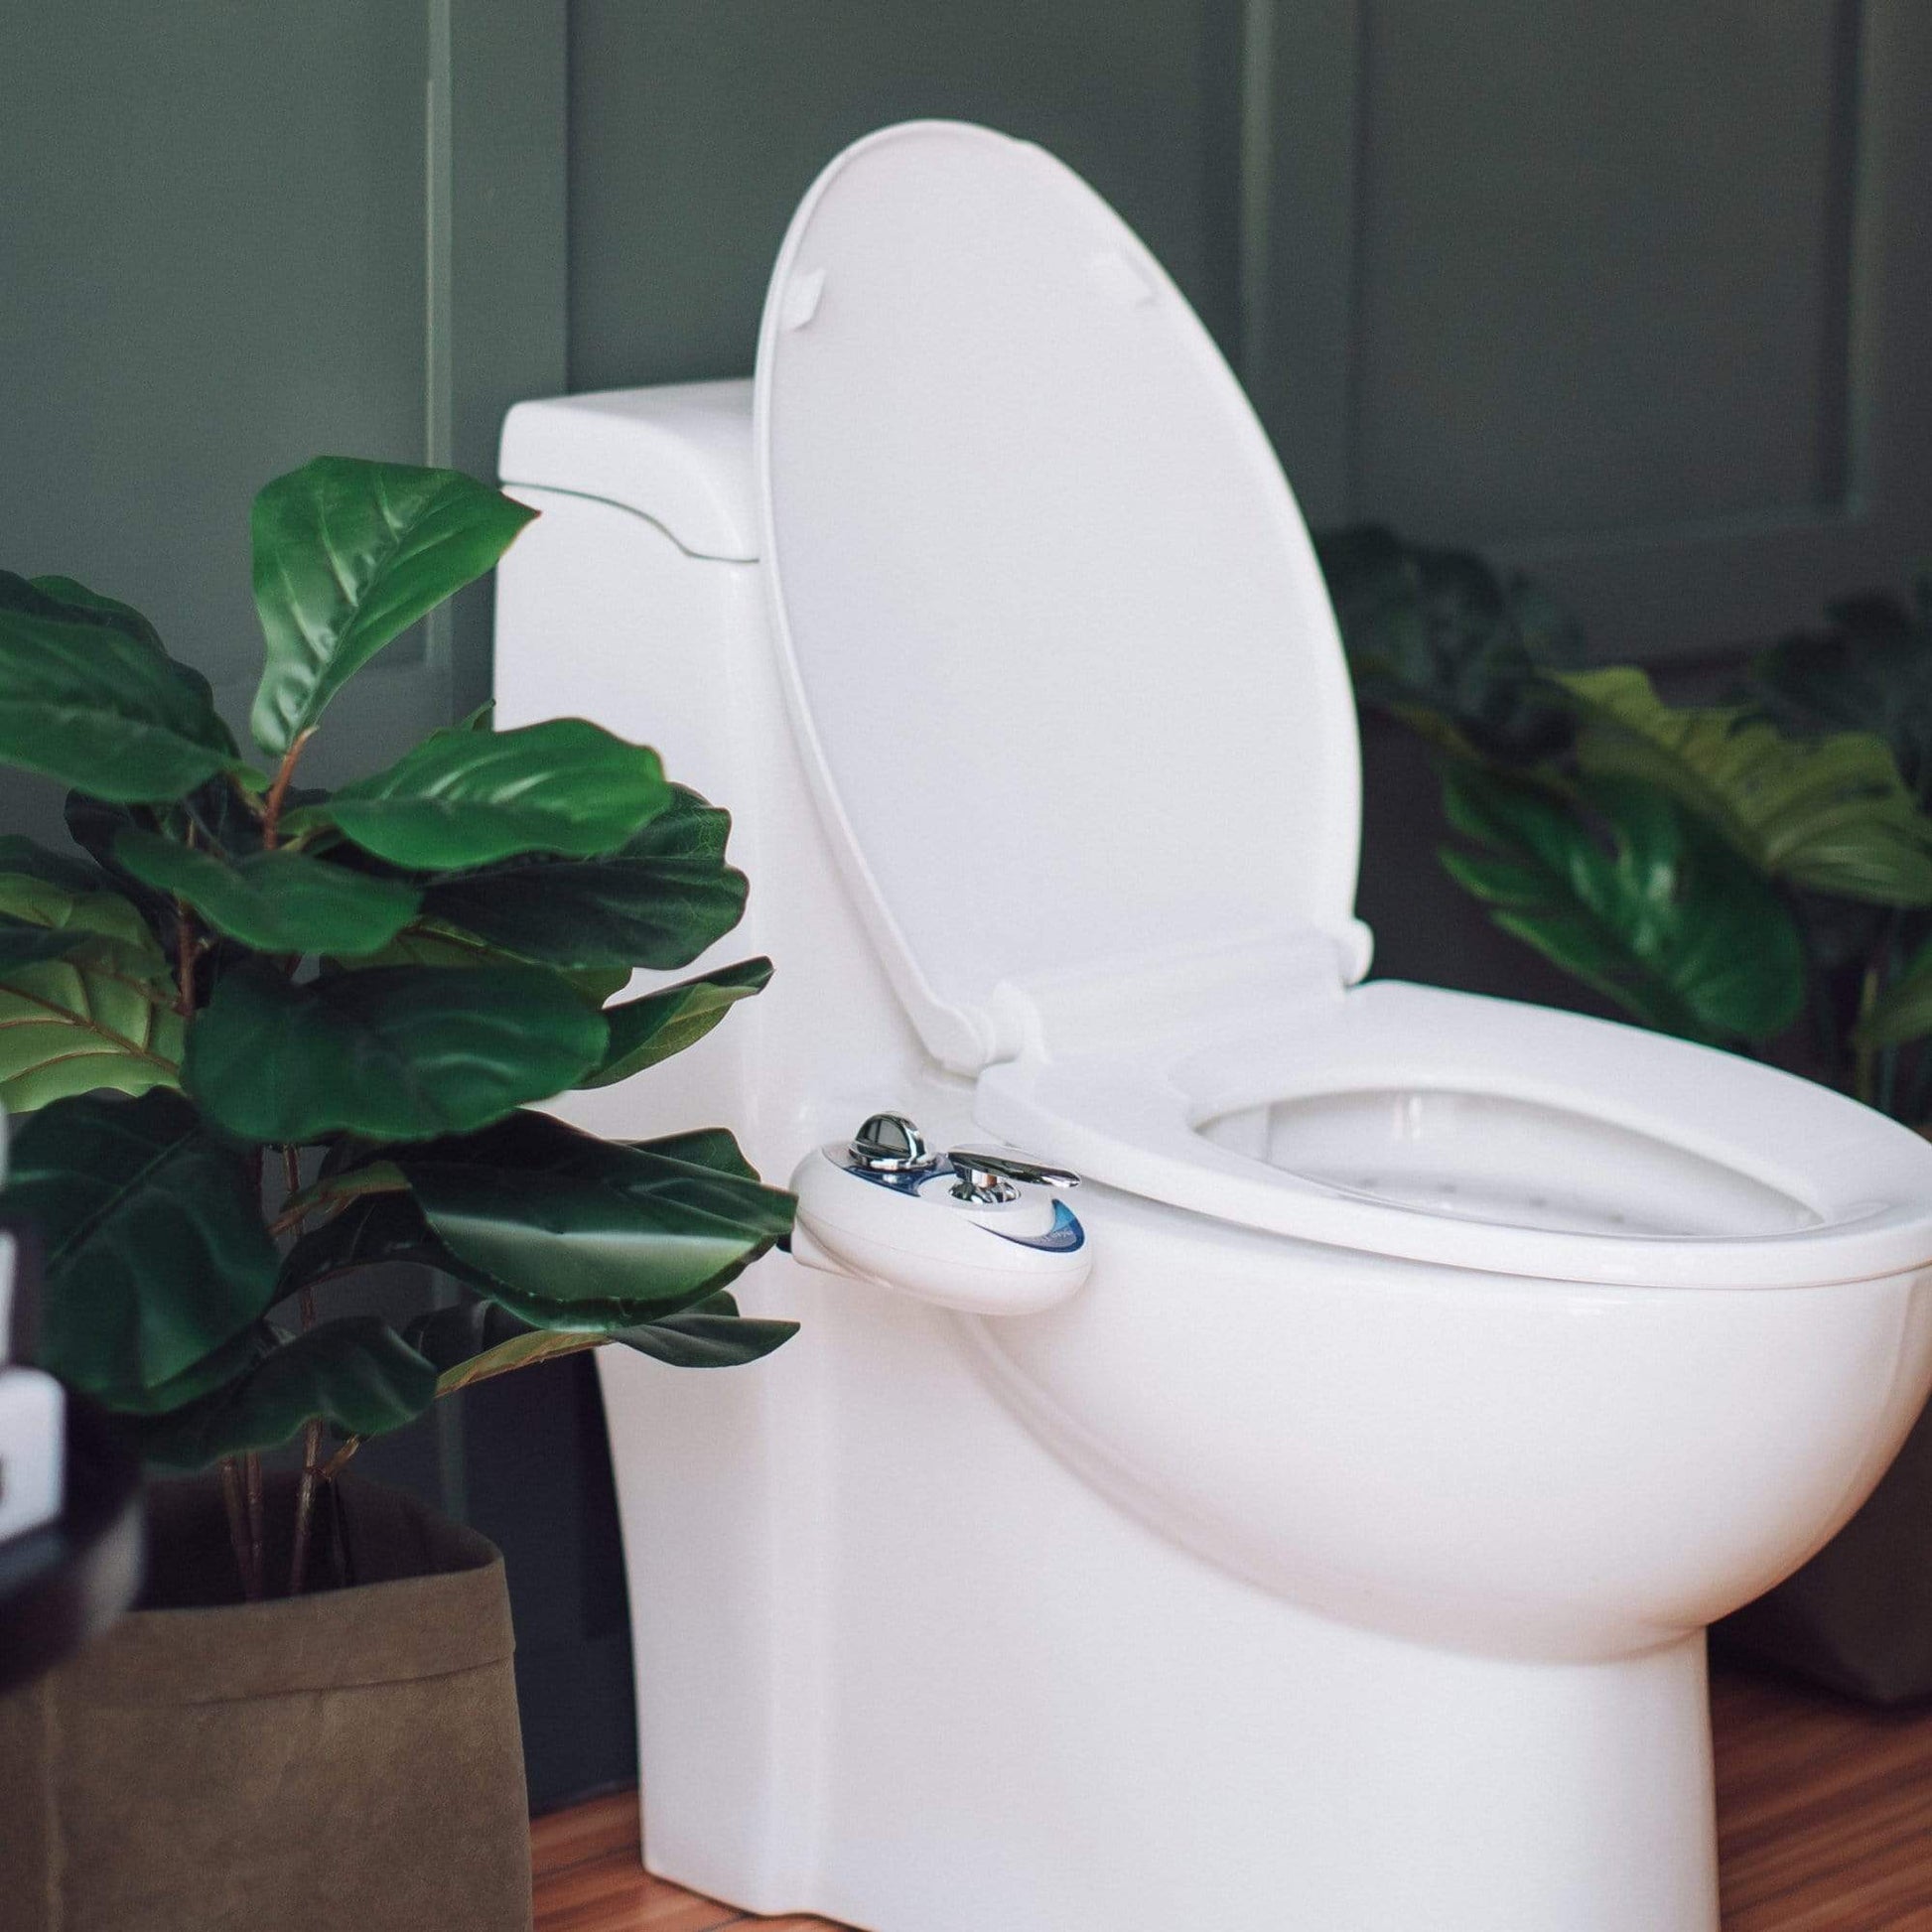 NEO 320 White installed on a toilet, in a modern bathroom with plants